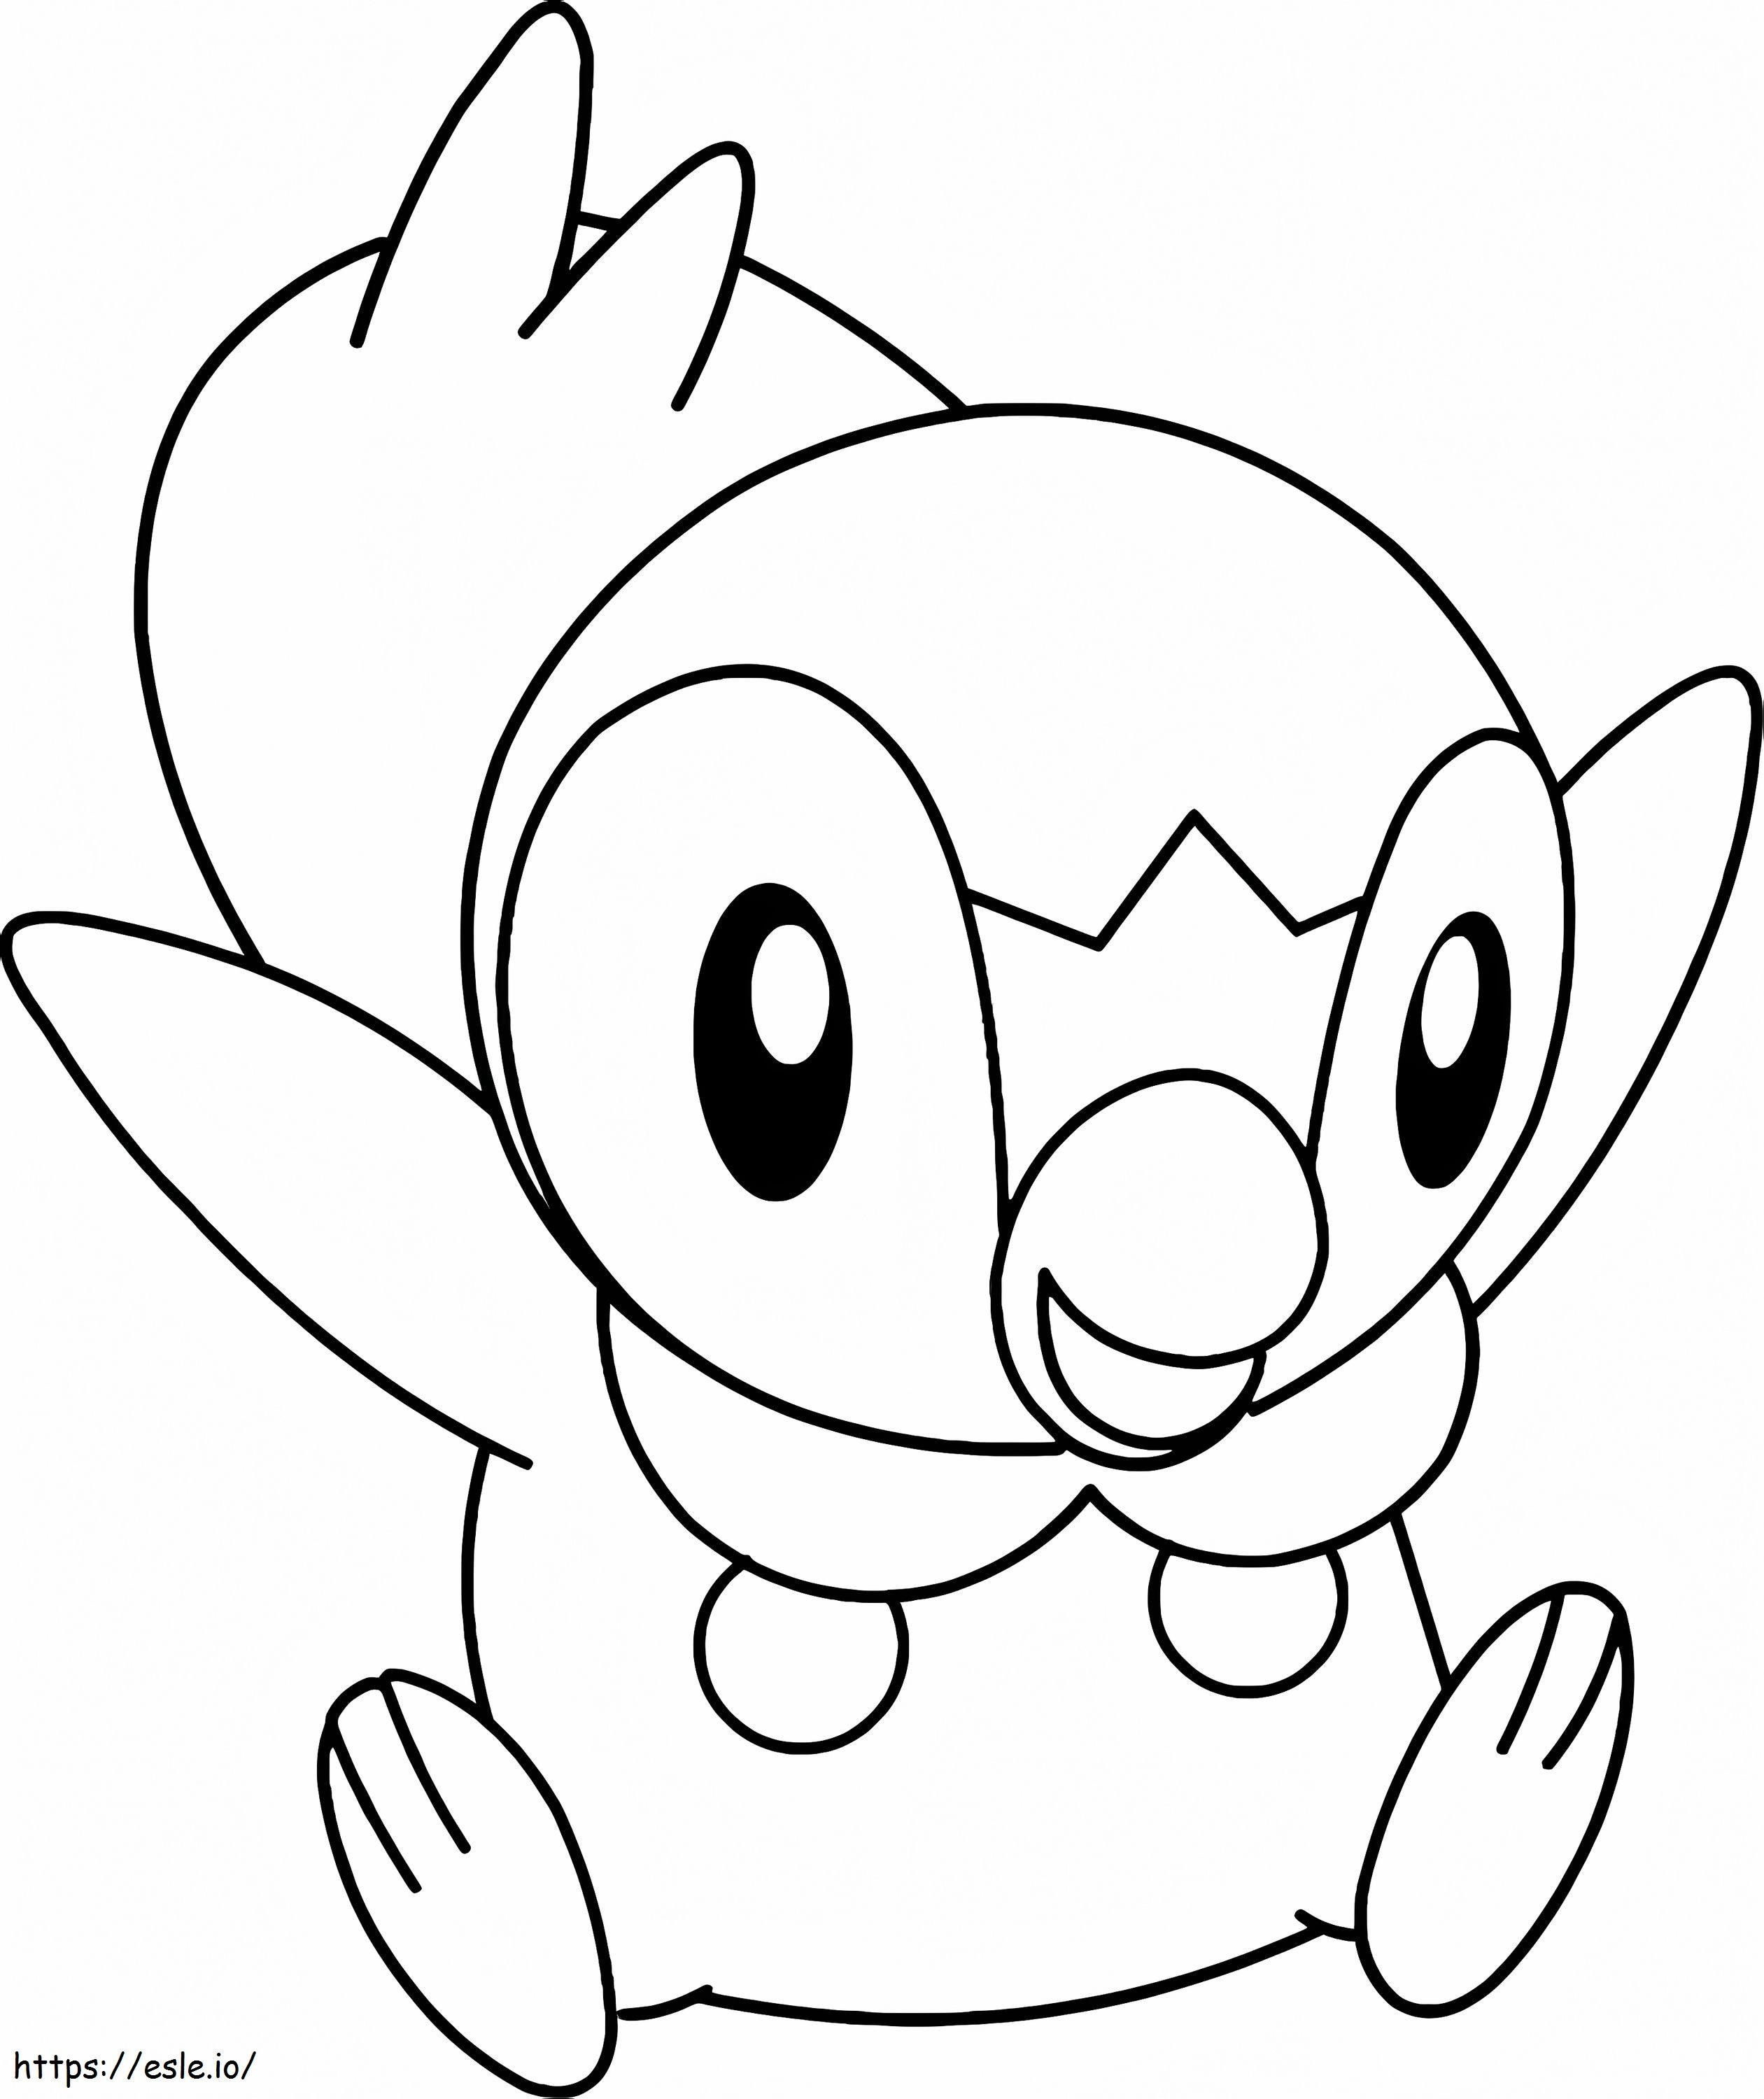 Pokemon Piplup coloring page